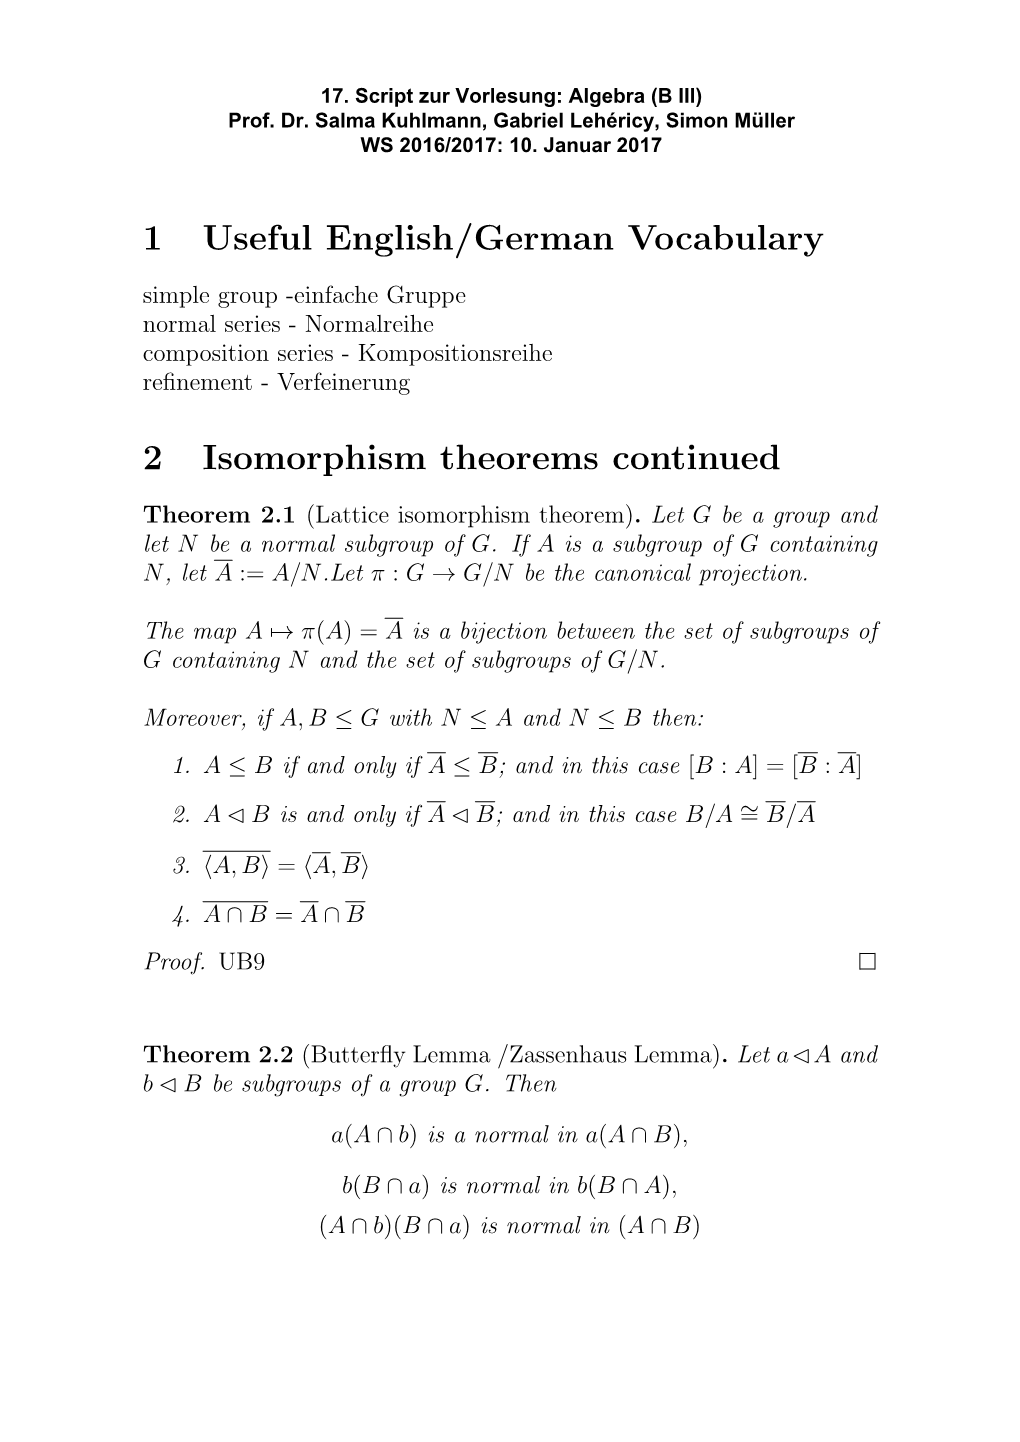 1 Useful English/German Vocabulary 2 Isomorphism Theorems Continued